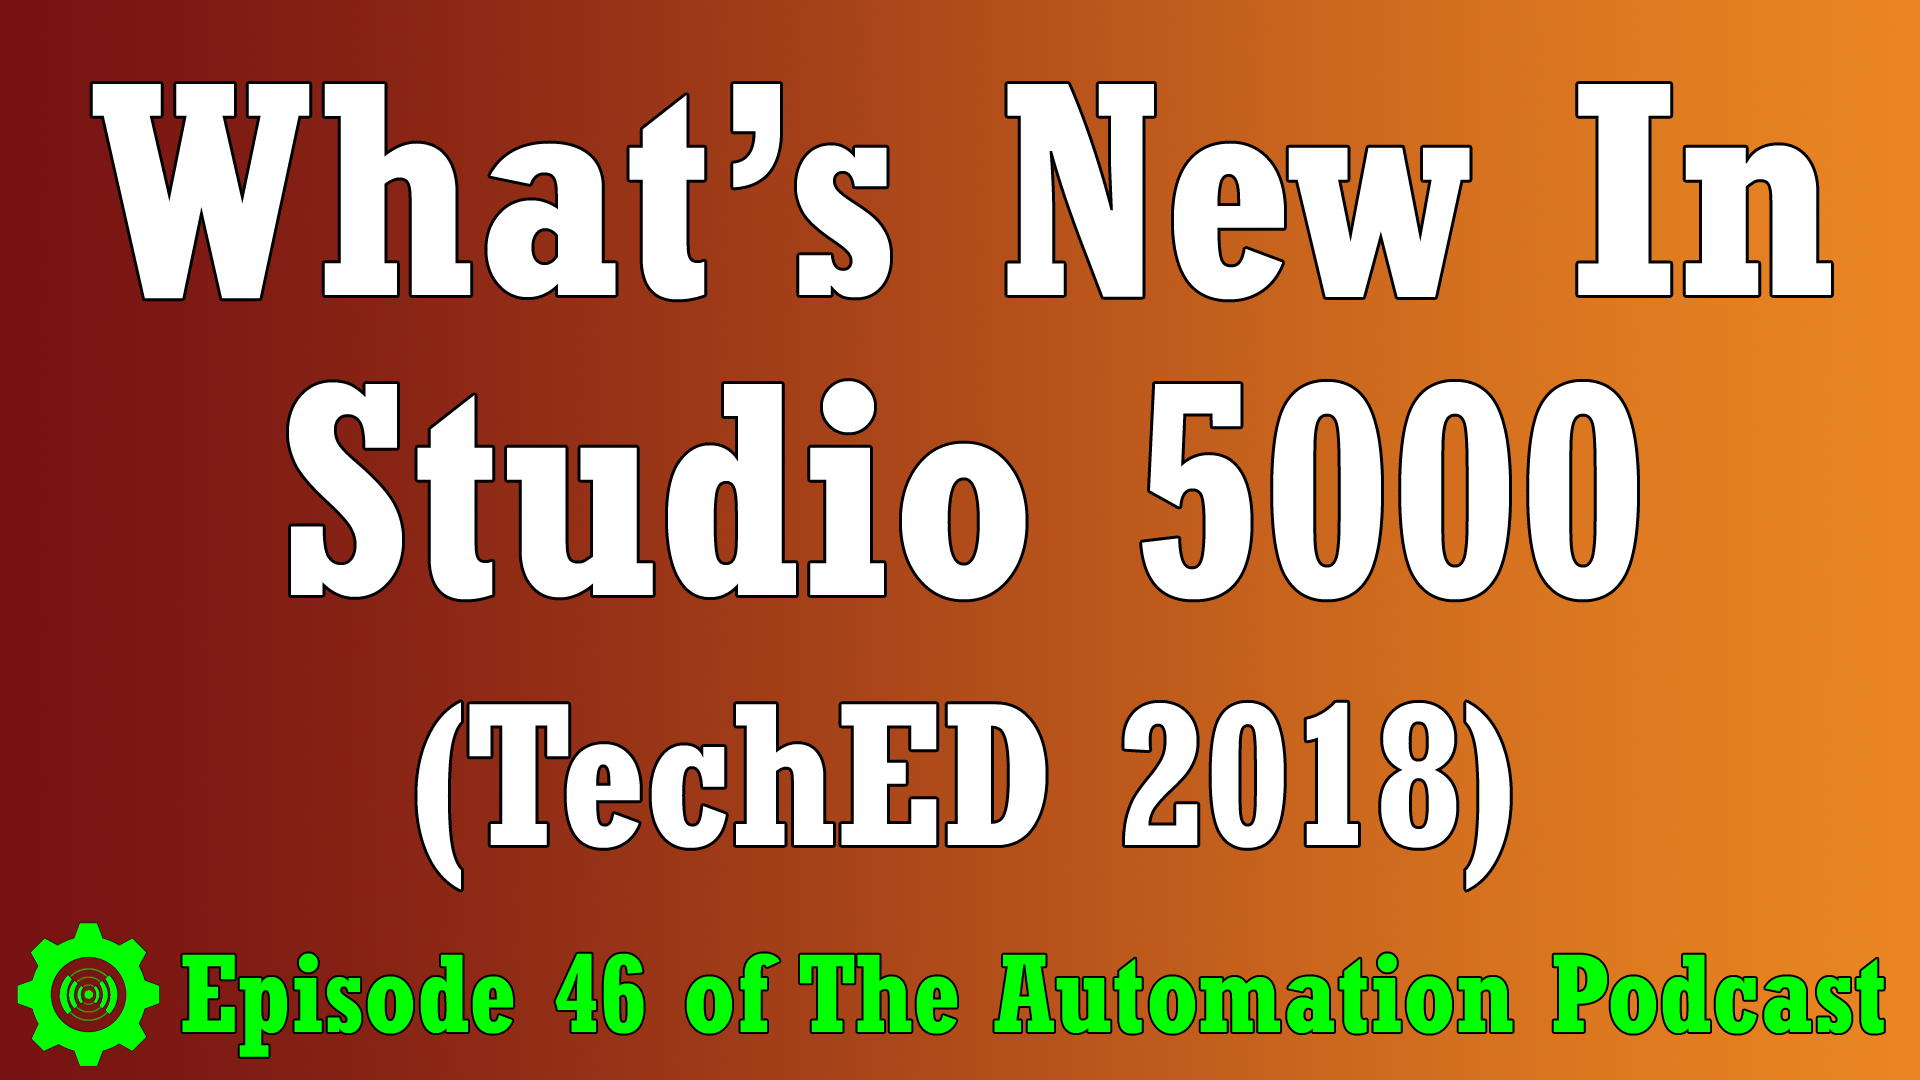 Studio 5000 - TechED18: What's New with Studio 5000 from TechED 2018 (P46)